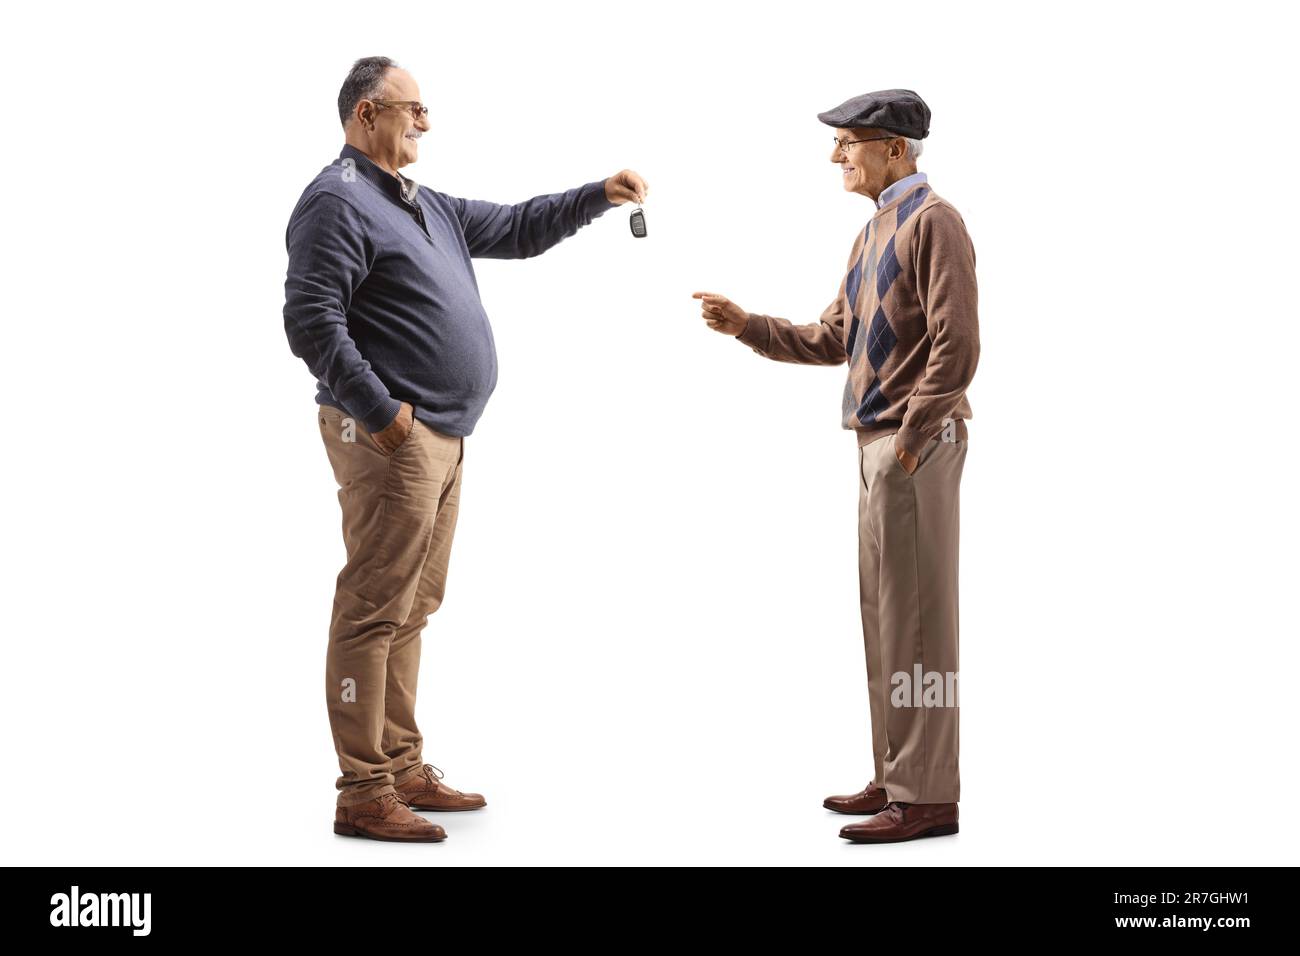 Mature man giving car keys to an elderly man isolated on white background Stock Photo